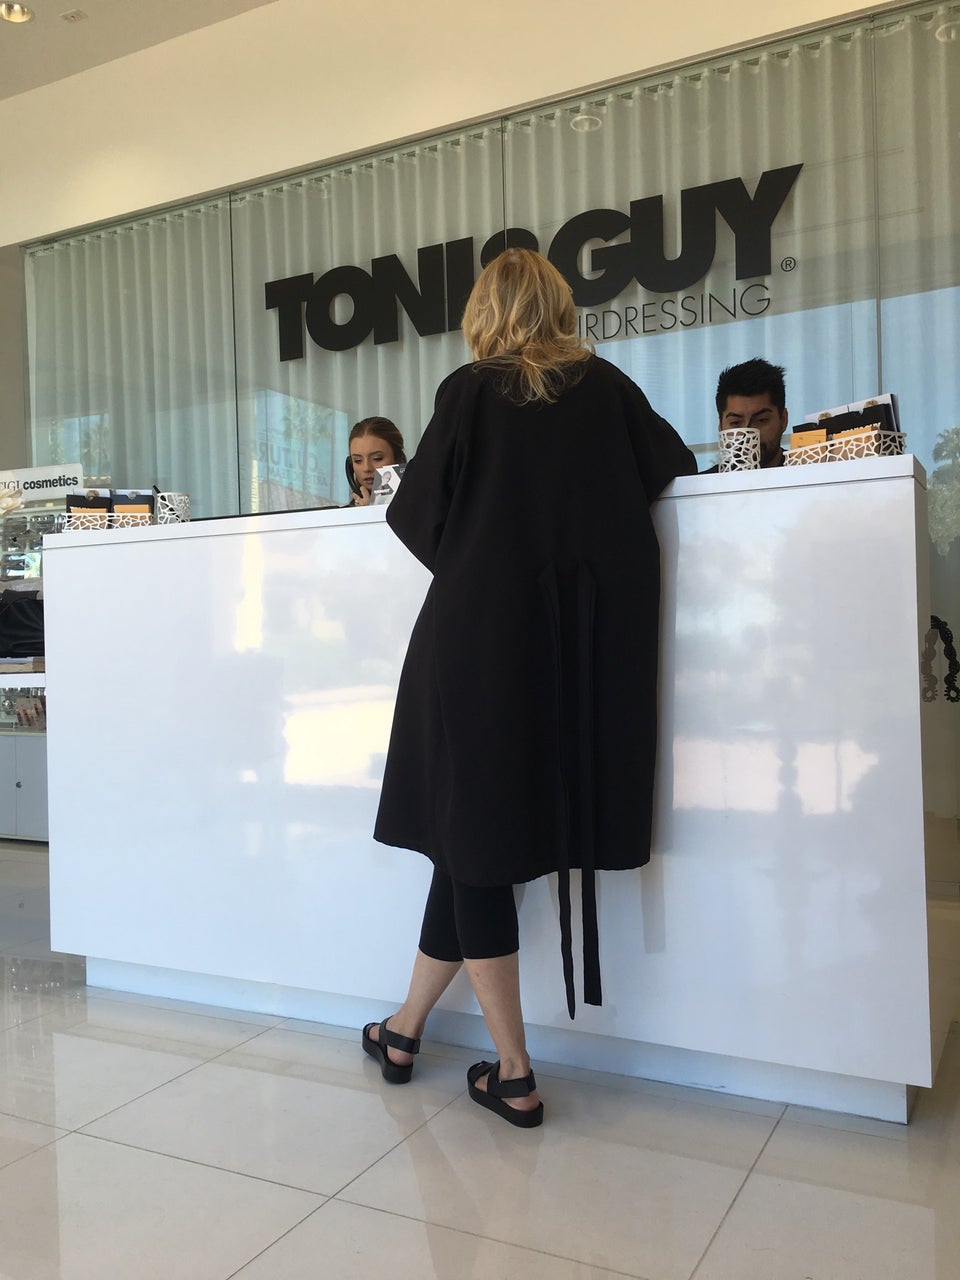 the / salon Powered by TONI&GUY